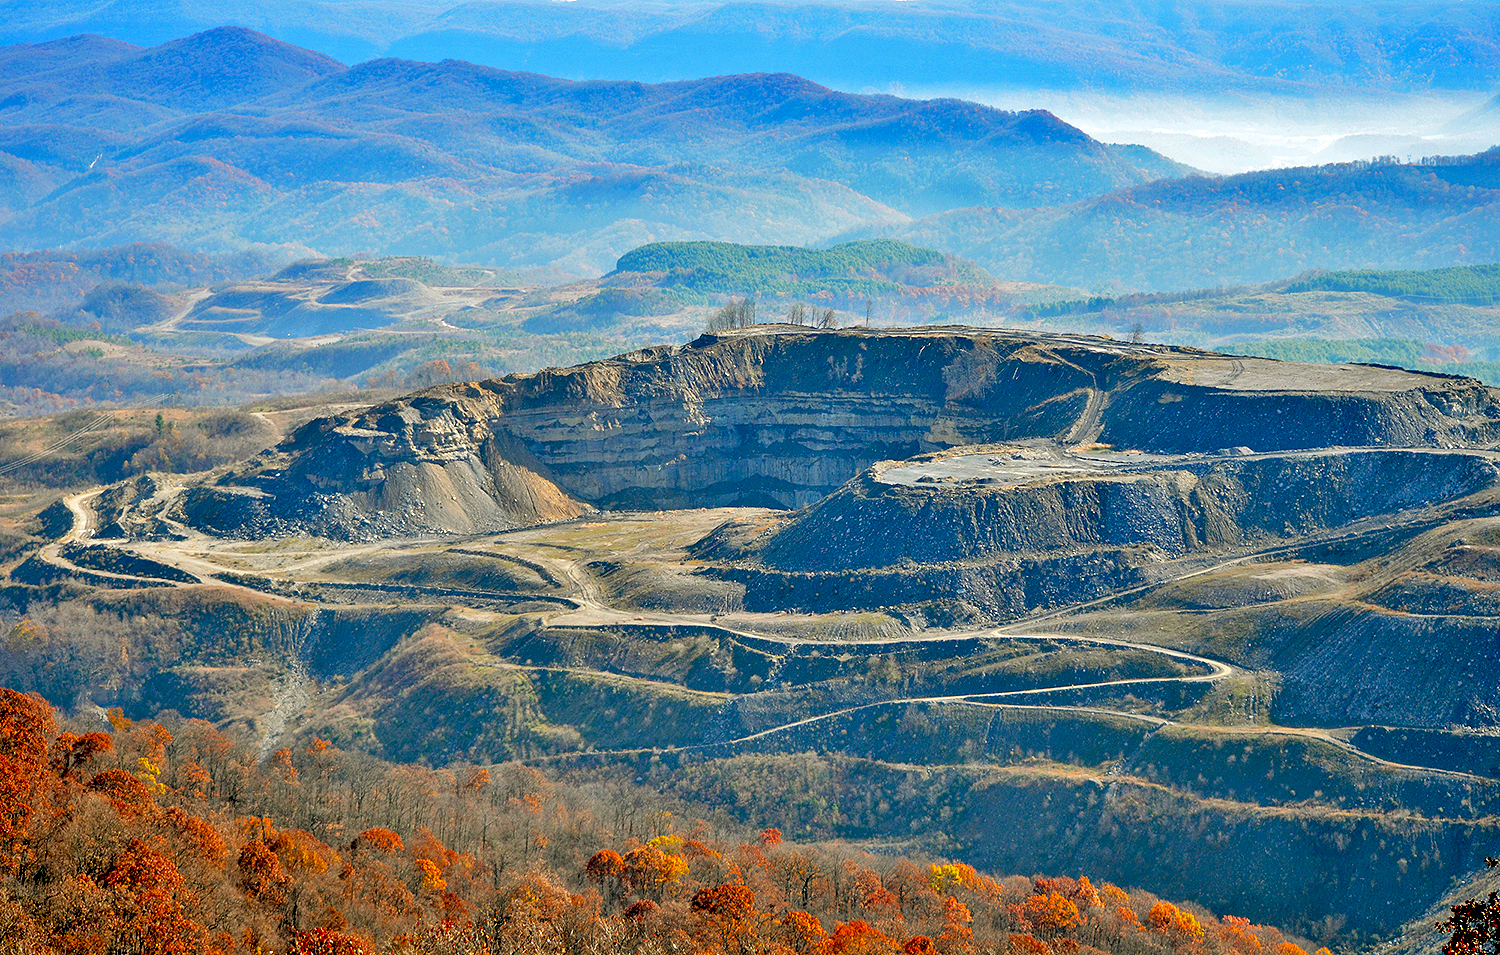 A highwall coal mine owned by West Virginia Gov. Jim Justice and his family sits unreclaimed in late 2017, years after an agreement with the commonwealth of Virginia originally mandated that cleanup be completed.